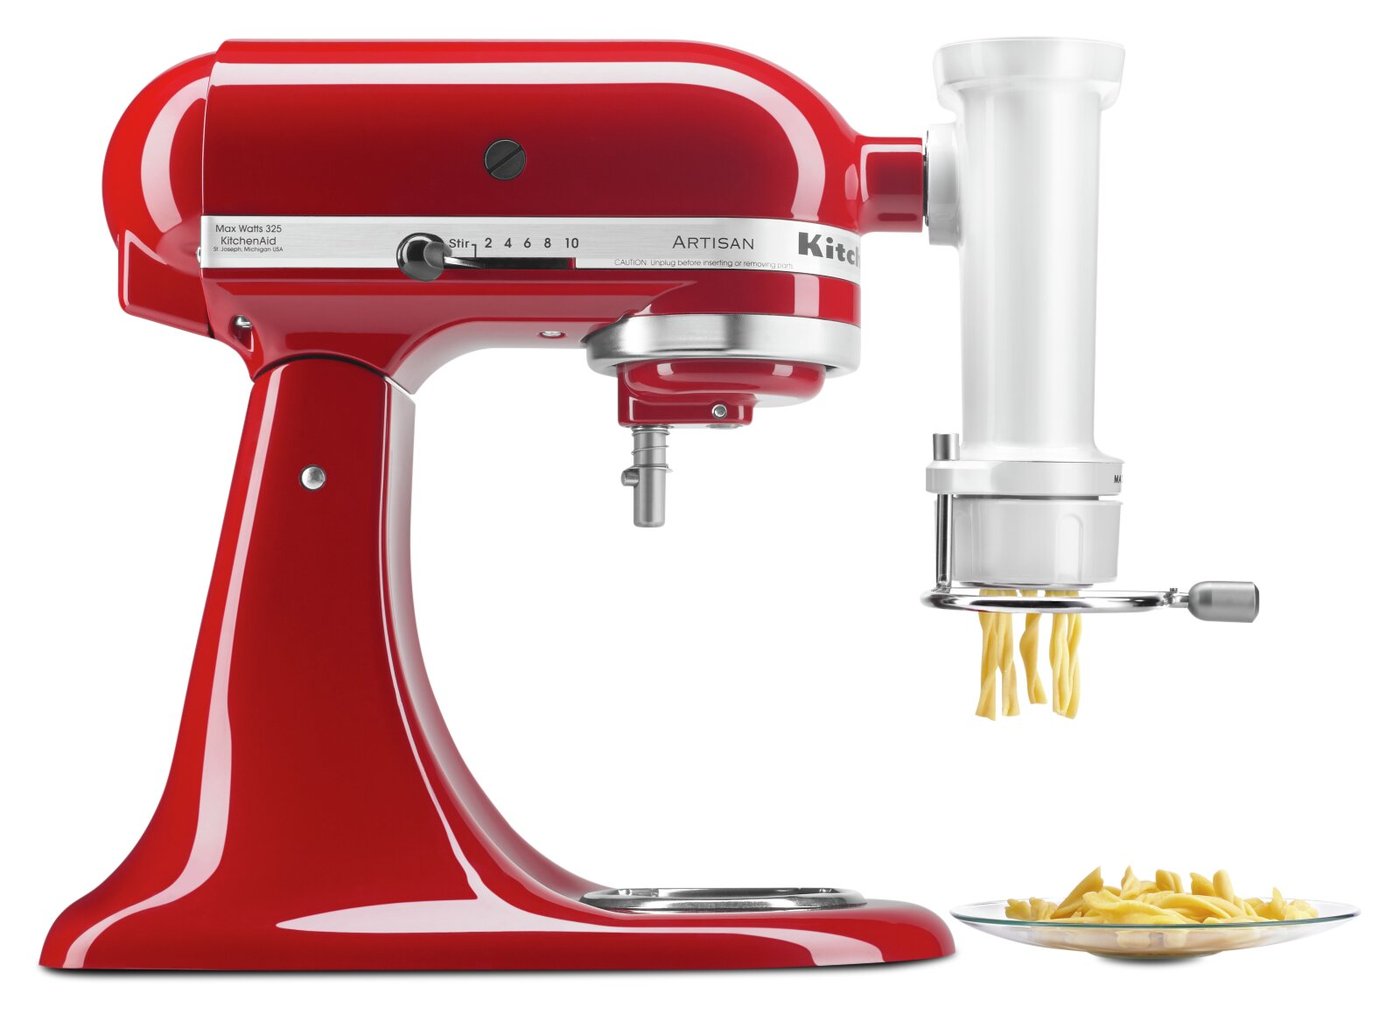 Top 7 Best KitchenAid Attachments That You Must Know in 2022 - 7 Top Review